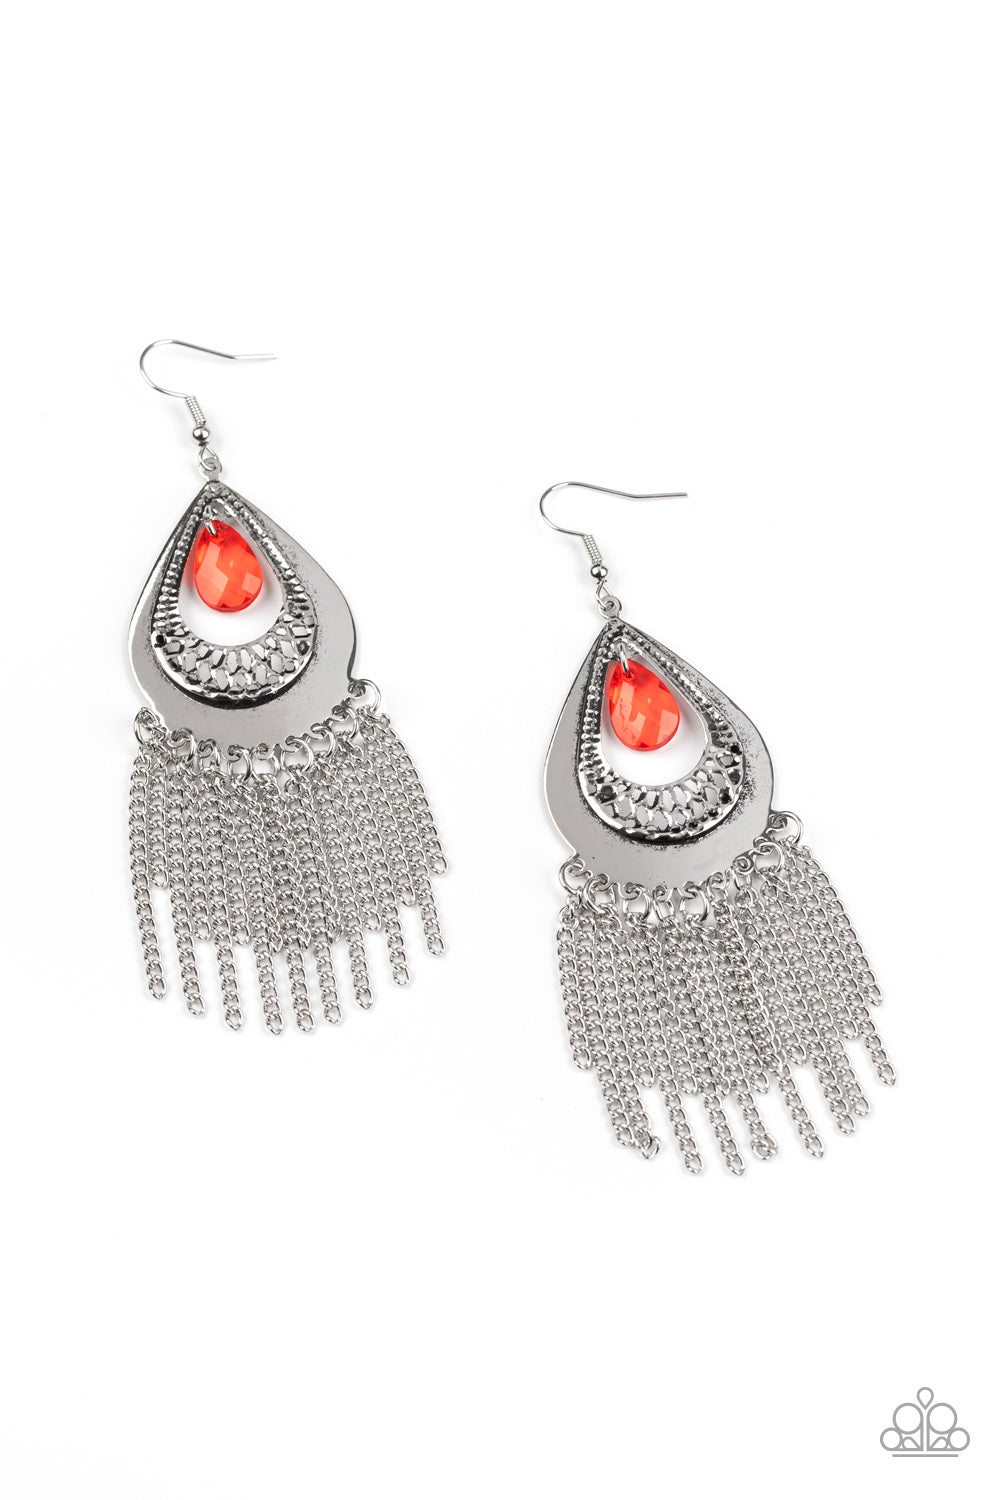 Paparazzi Accessories - Scattered Storms - Red Earrings - Alies Bling Bar